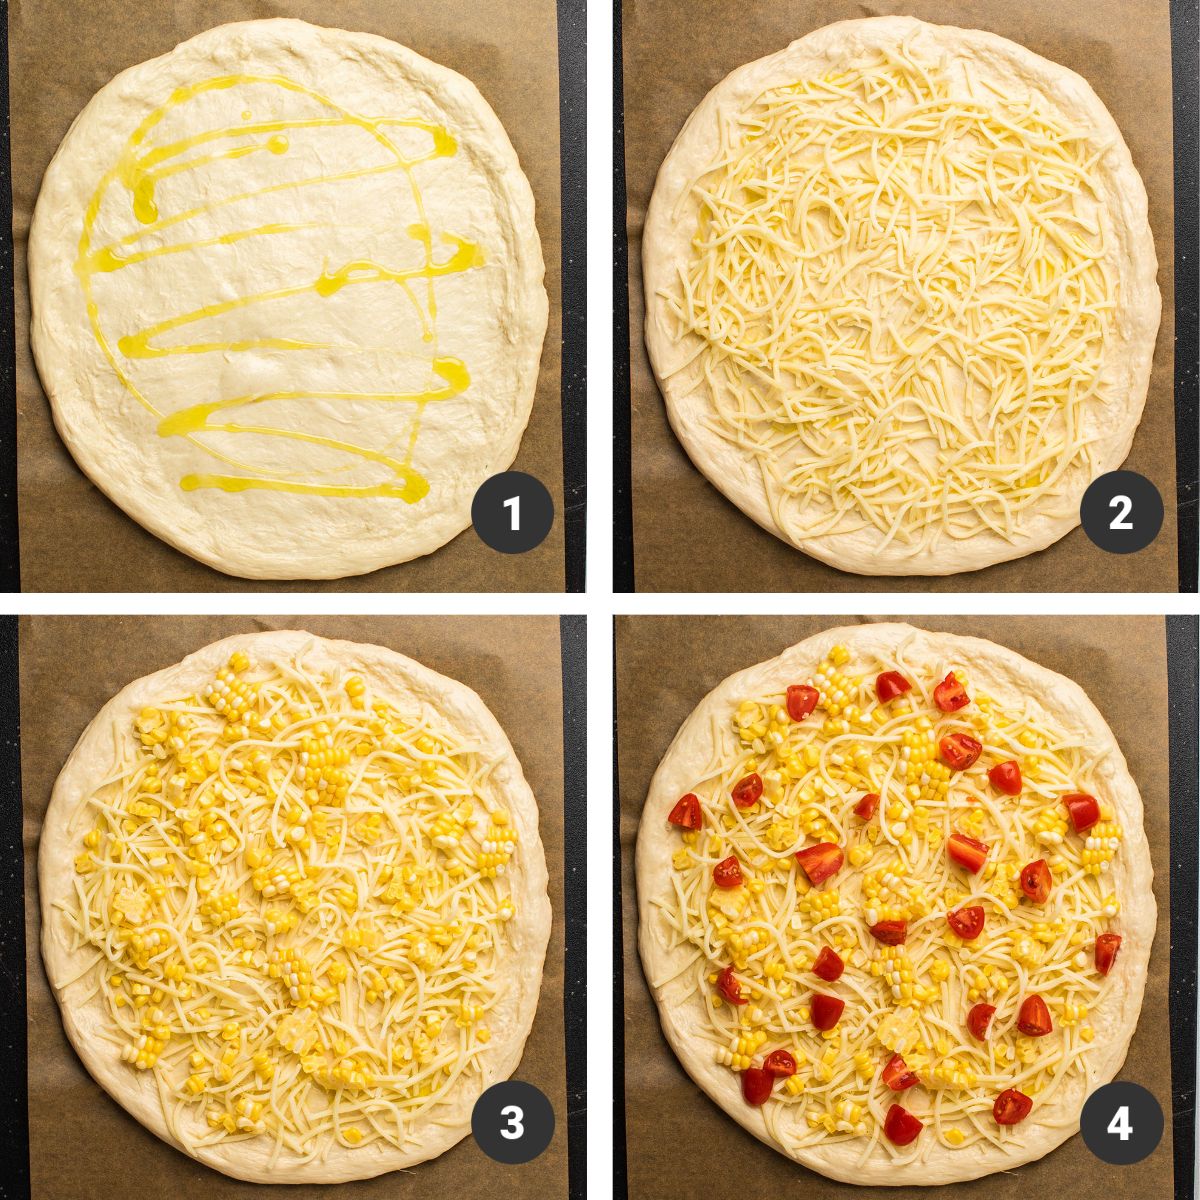 Adding cheese, corn, and tomatoes to pizza dough.